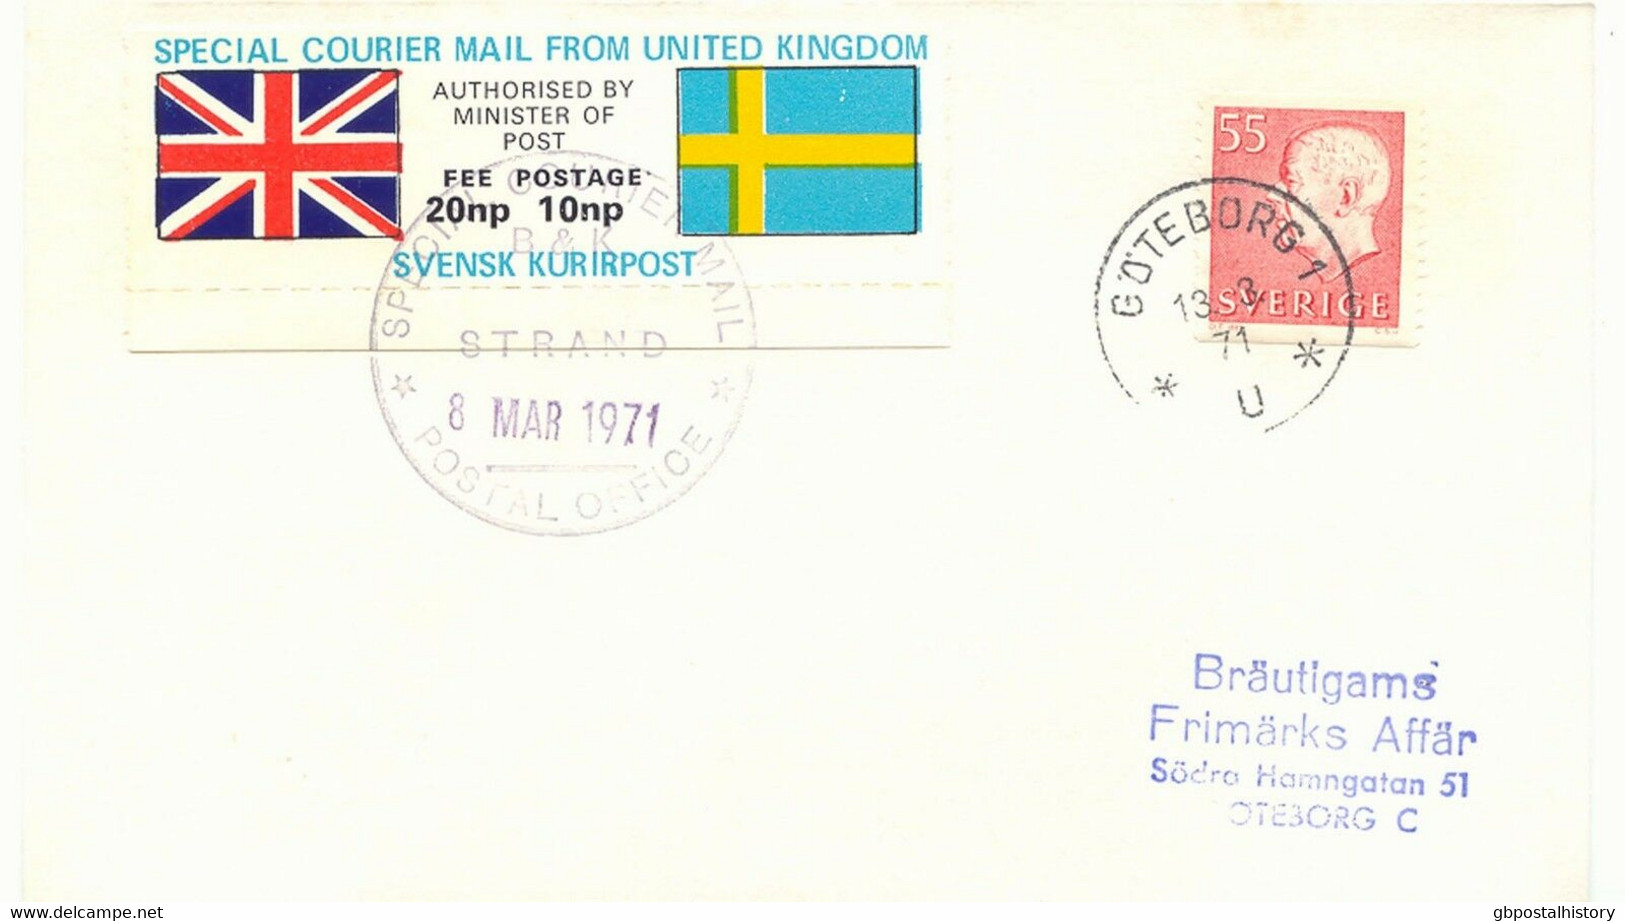 GB 8.3.1971 SPECIAL COURIERMAIL FROM UNITED KINGDOM TO SWEDEN SVENSK KURIRPOST - Covers & Documents